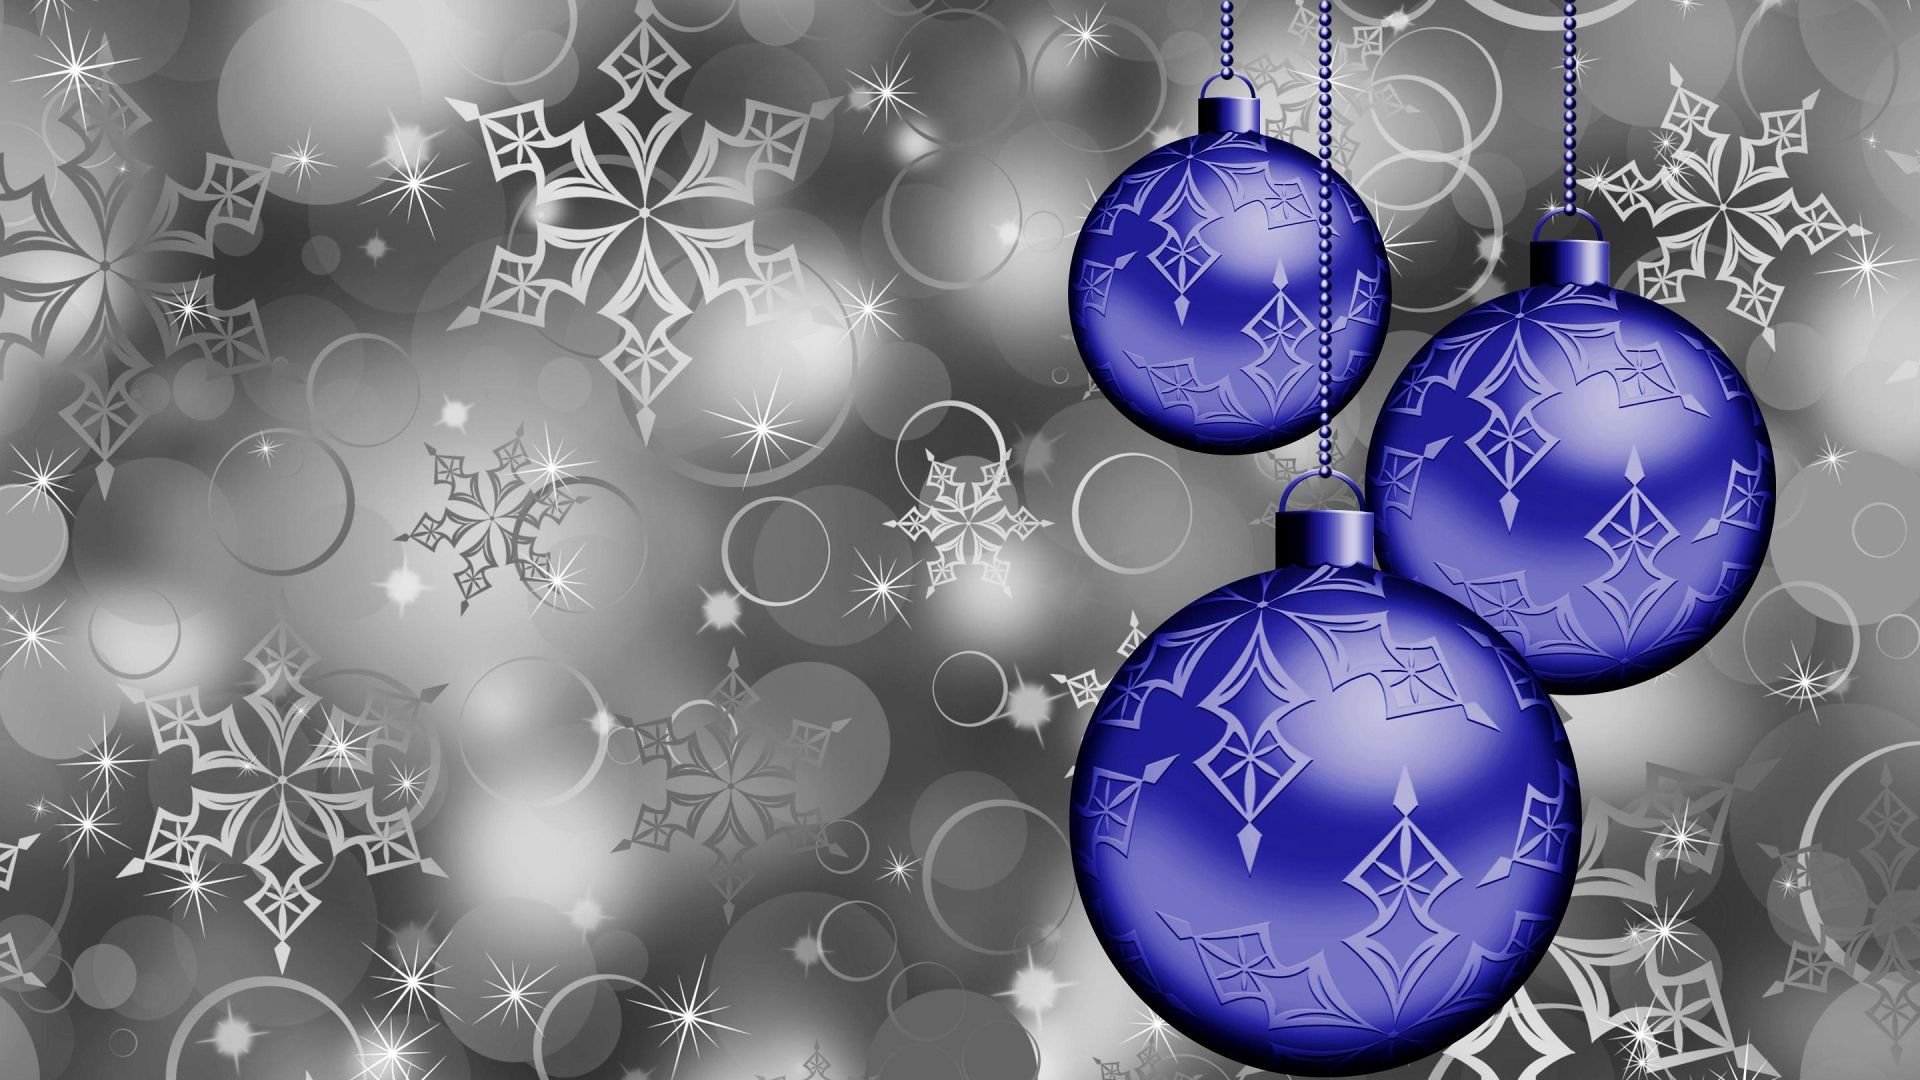 Free download Blue Christmas Ornaments HD Wallpaper Background Image [1920x1200] for your Desktop, Mobile & Tablet. Explore Blue Ornaments Wallpaper. Blue Ornaments Wallpaper, Christmas Ornaments Wallpaper, Christmas Ornaments Wallpaper for Desktop